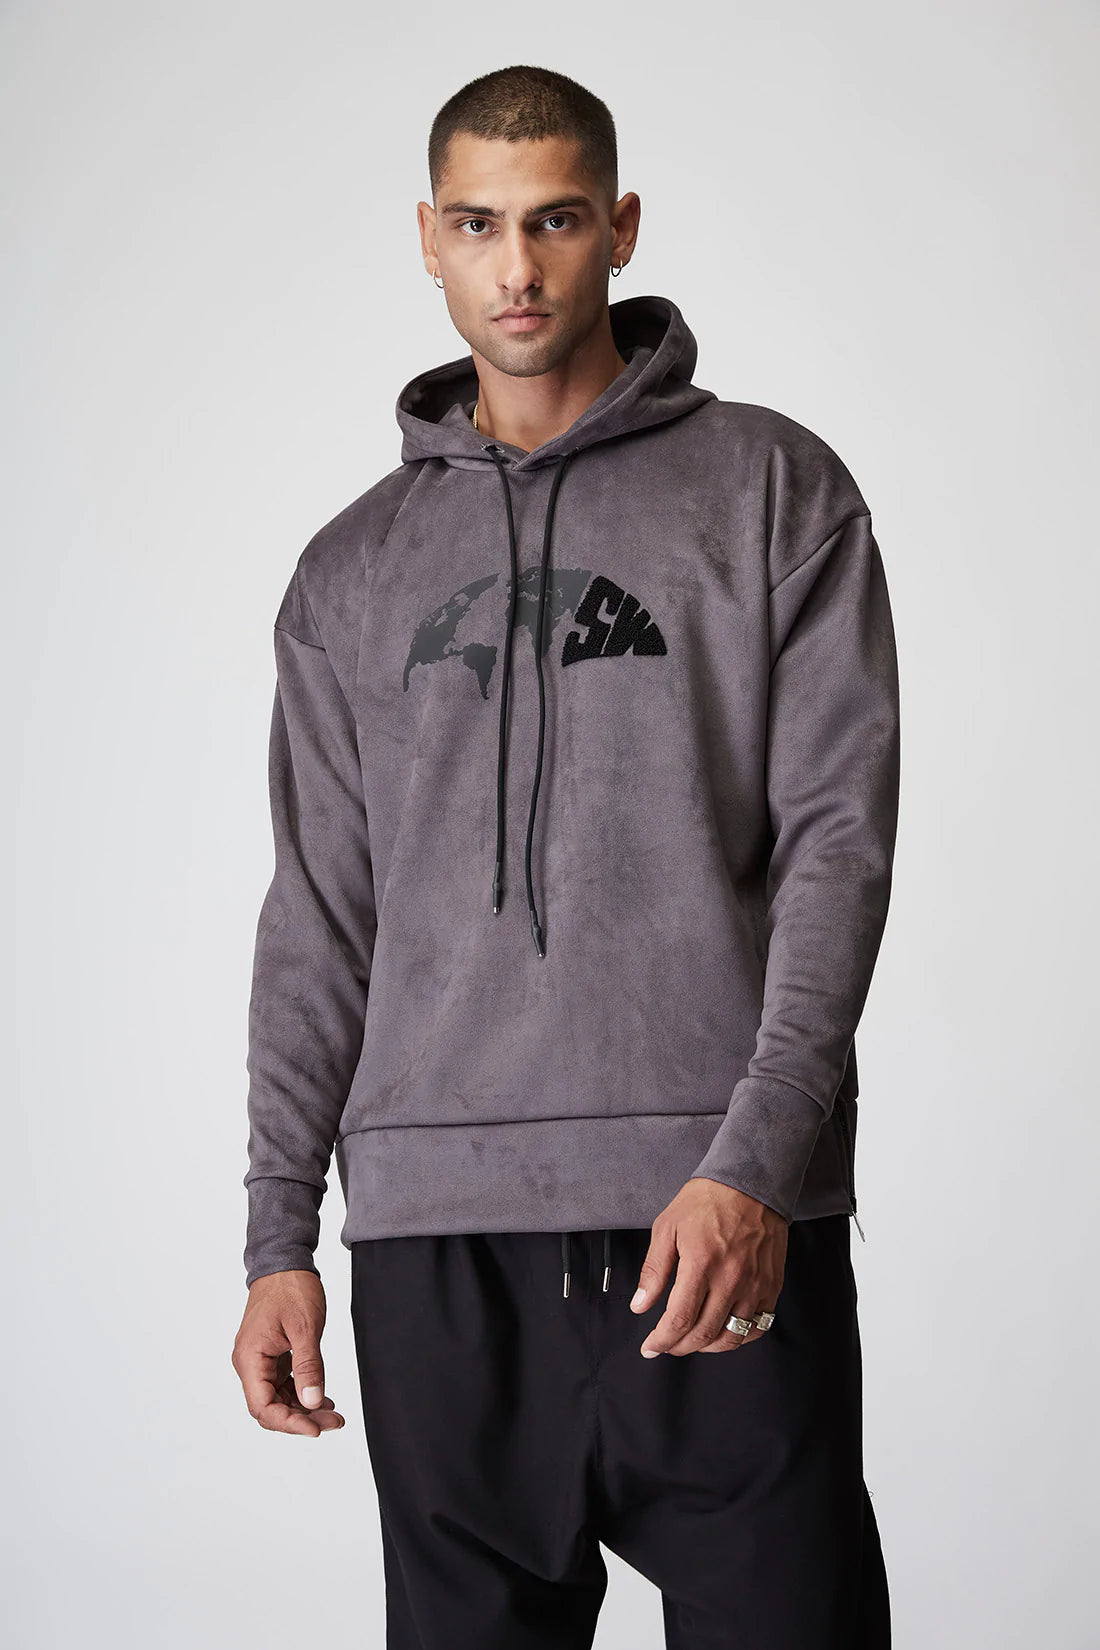 Discover World Hoodie